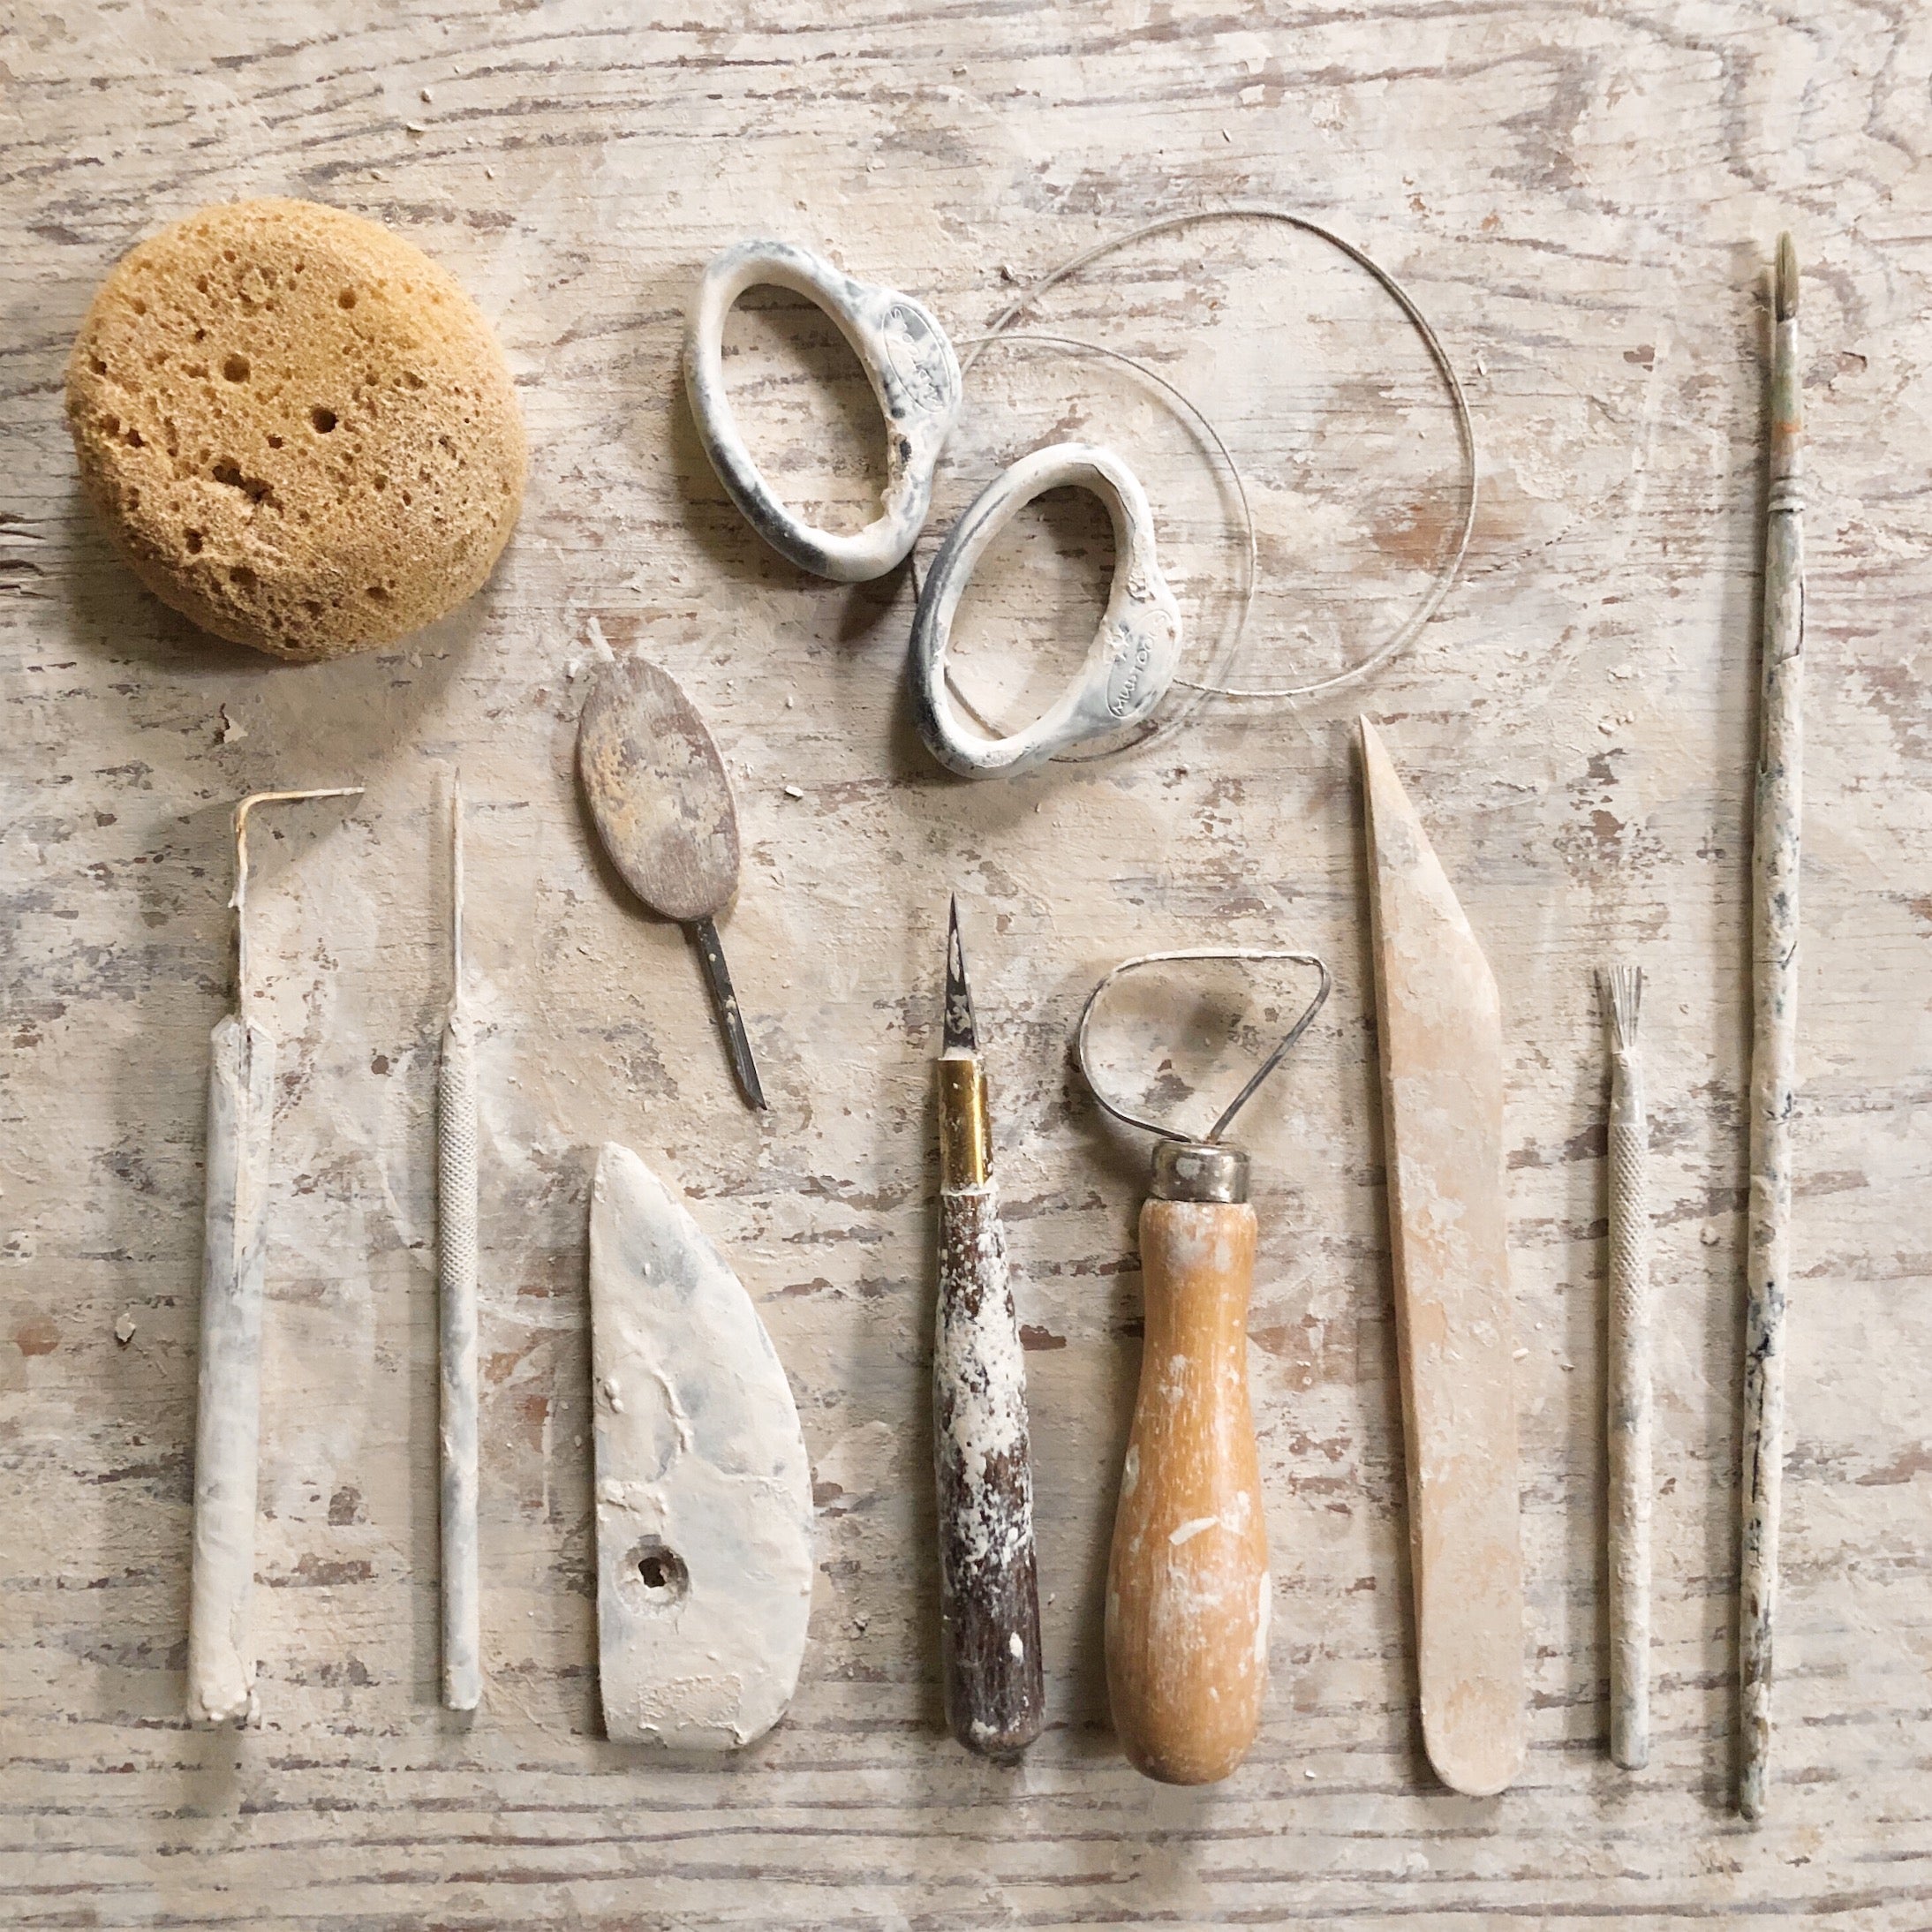 TOOLS OF THE TRADE: PICKLE POTTERY – AMANDA HUNT